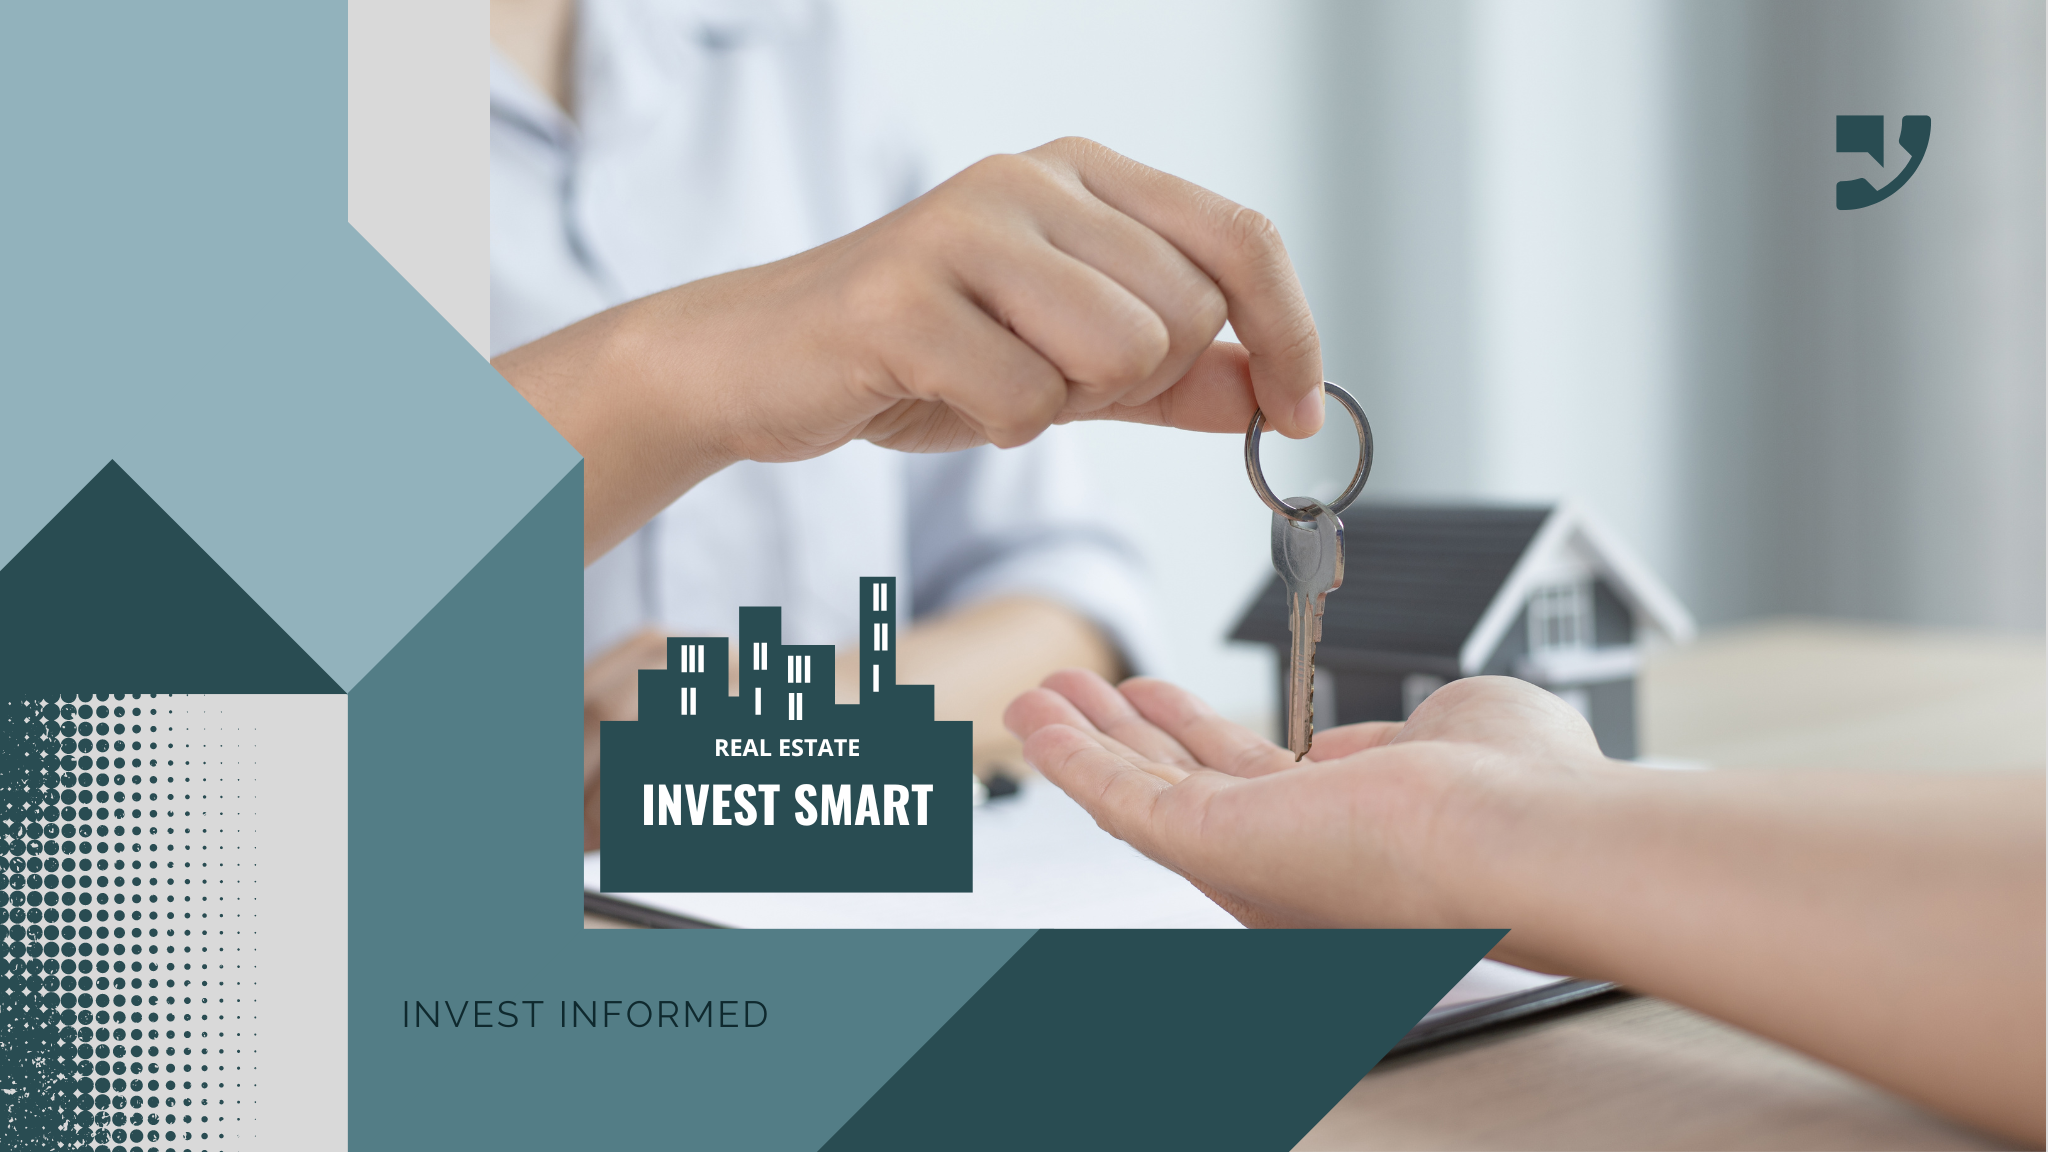 invest smart with real estate feasibility